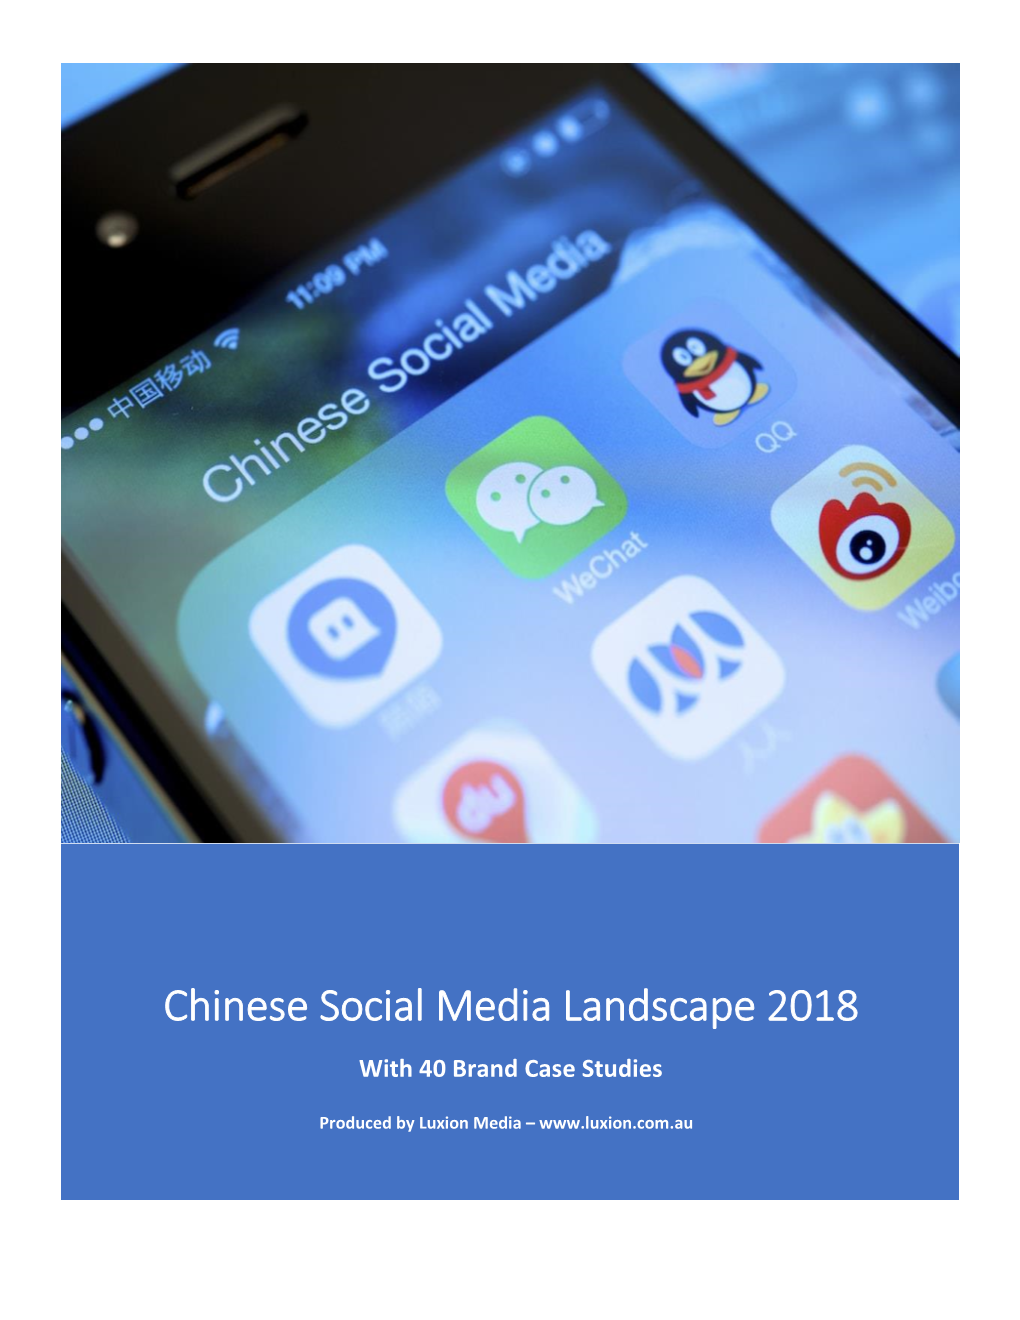 Chinese Social Media Landscape 2018 with 40 Brand Case Studies